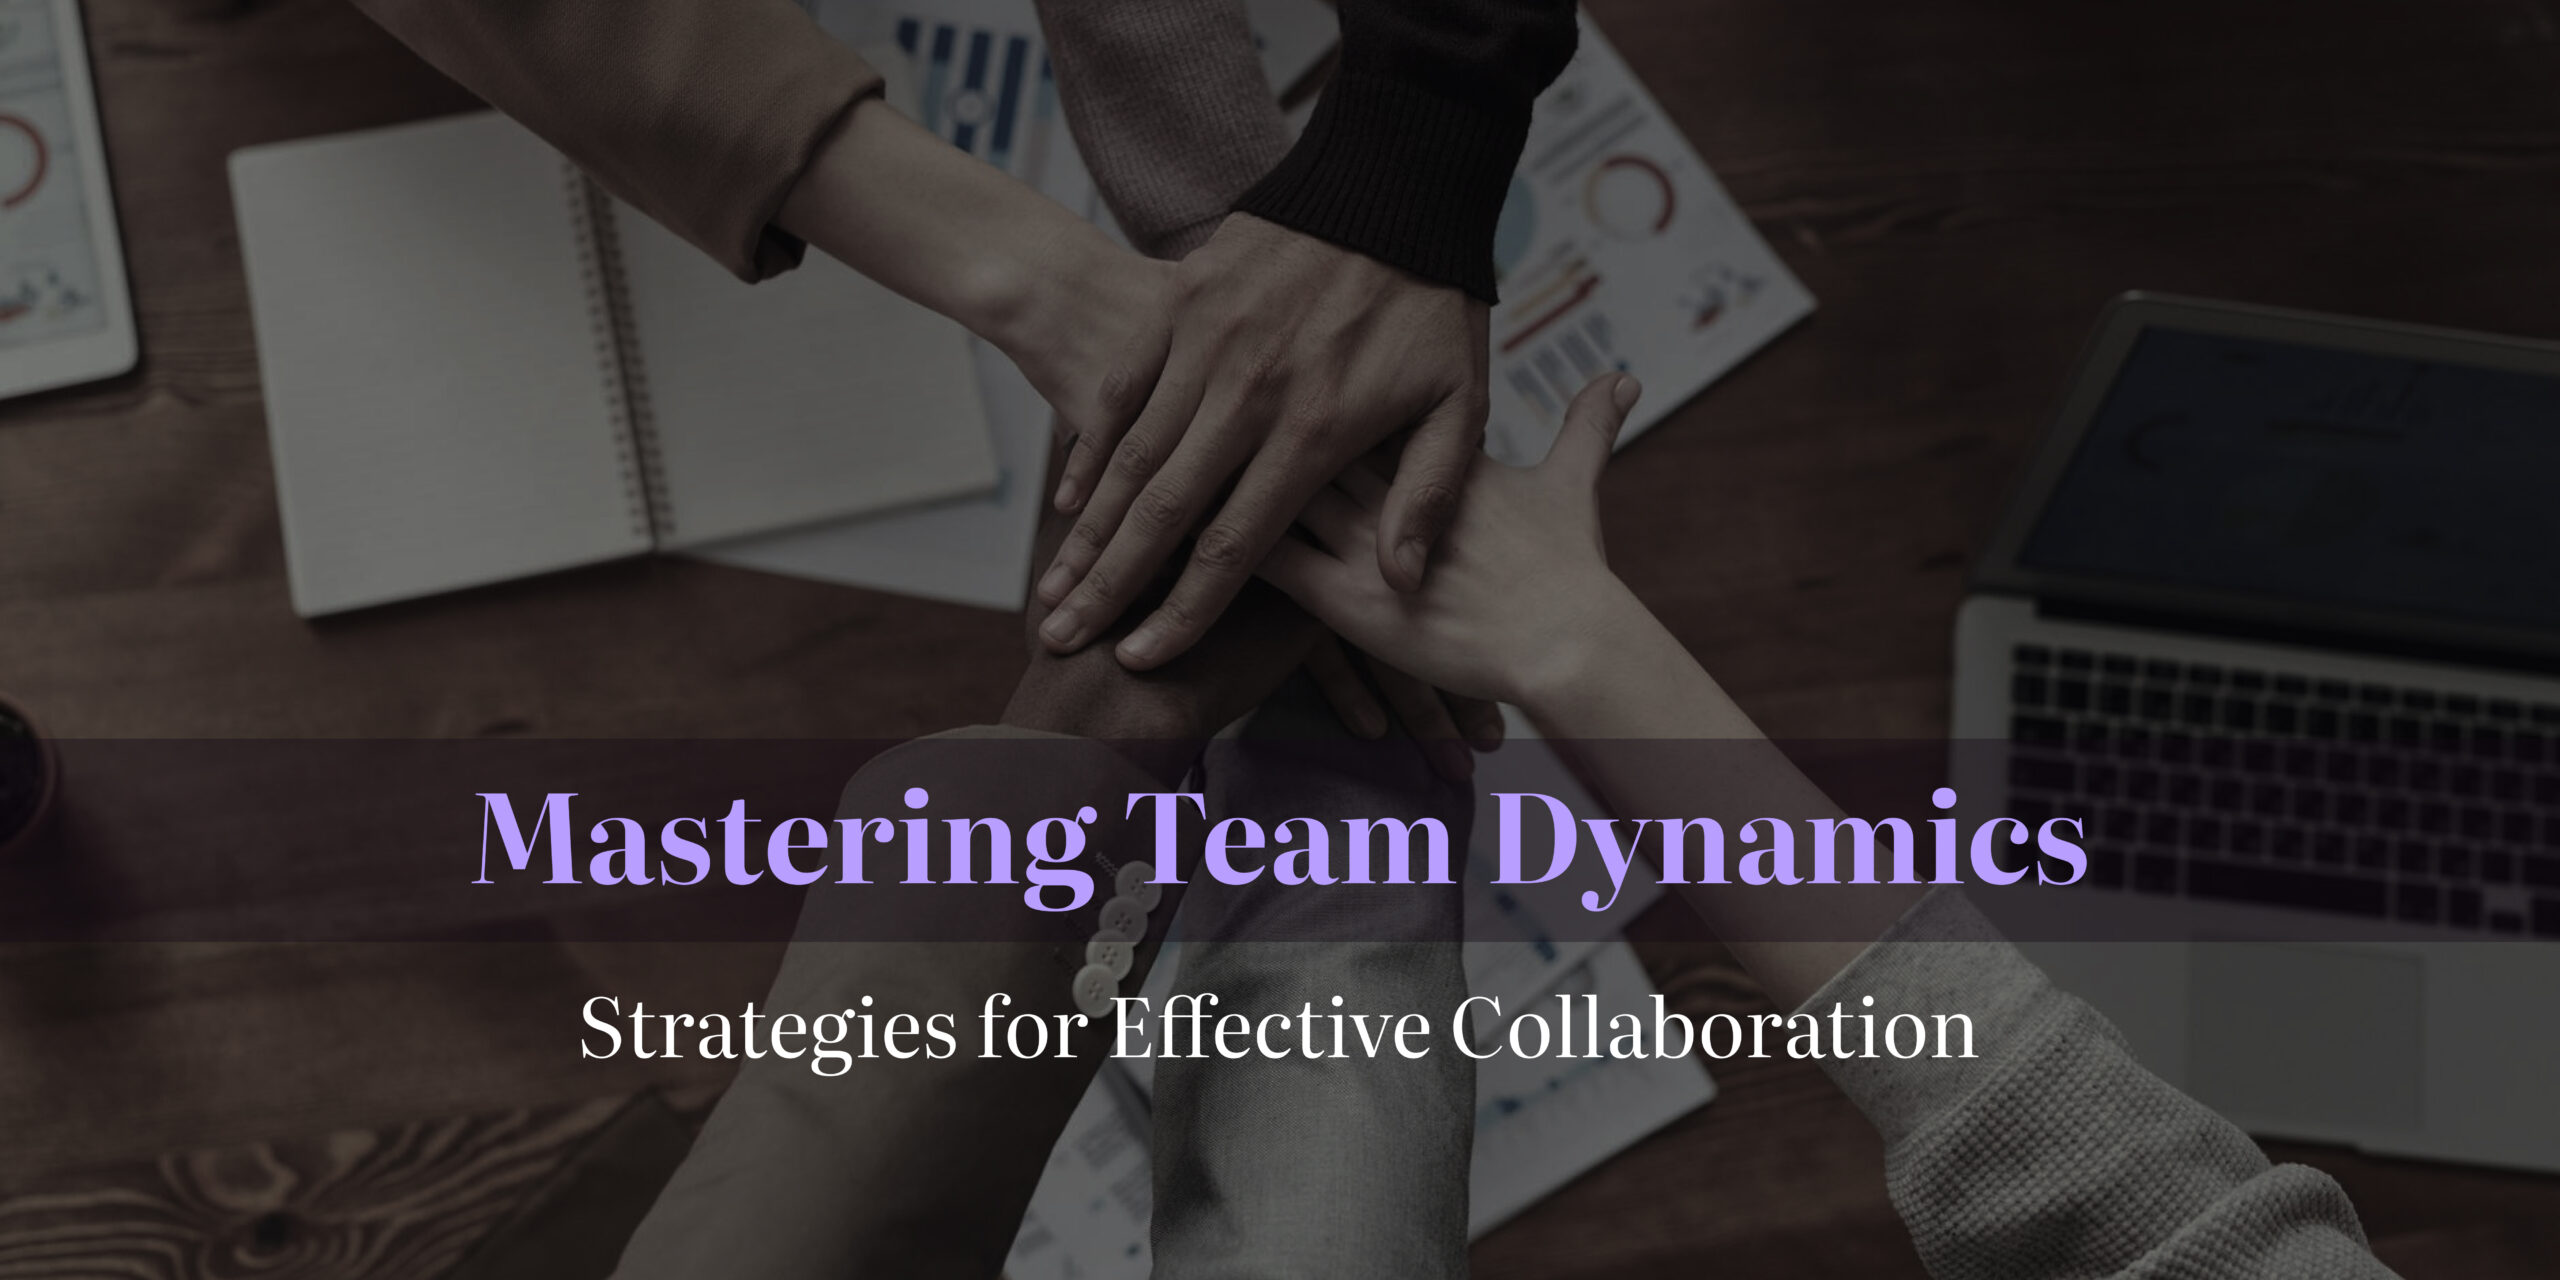 Mastering Team Dynamics: Strategies for Effective Collaboration